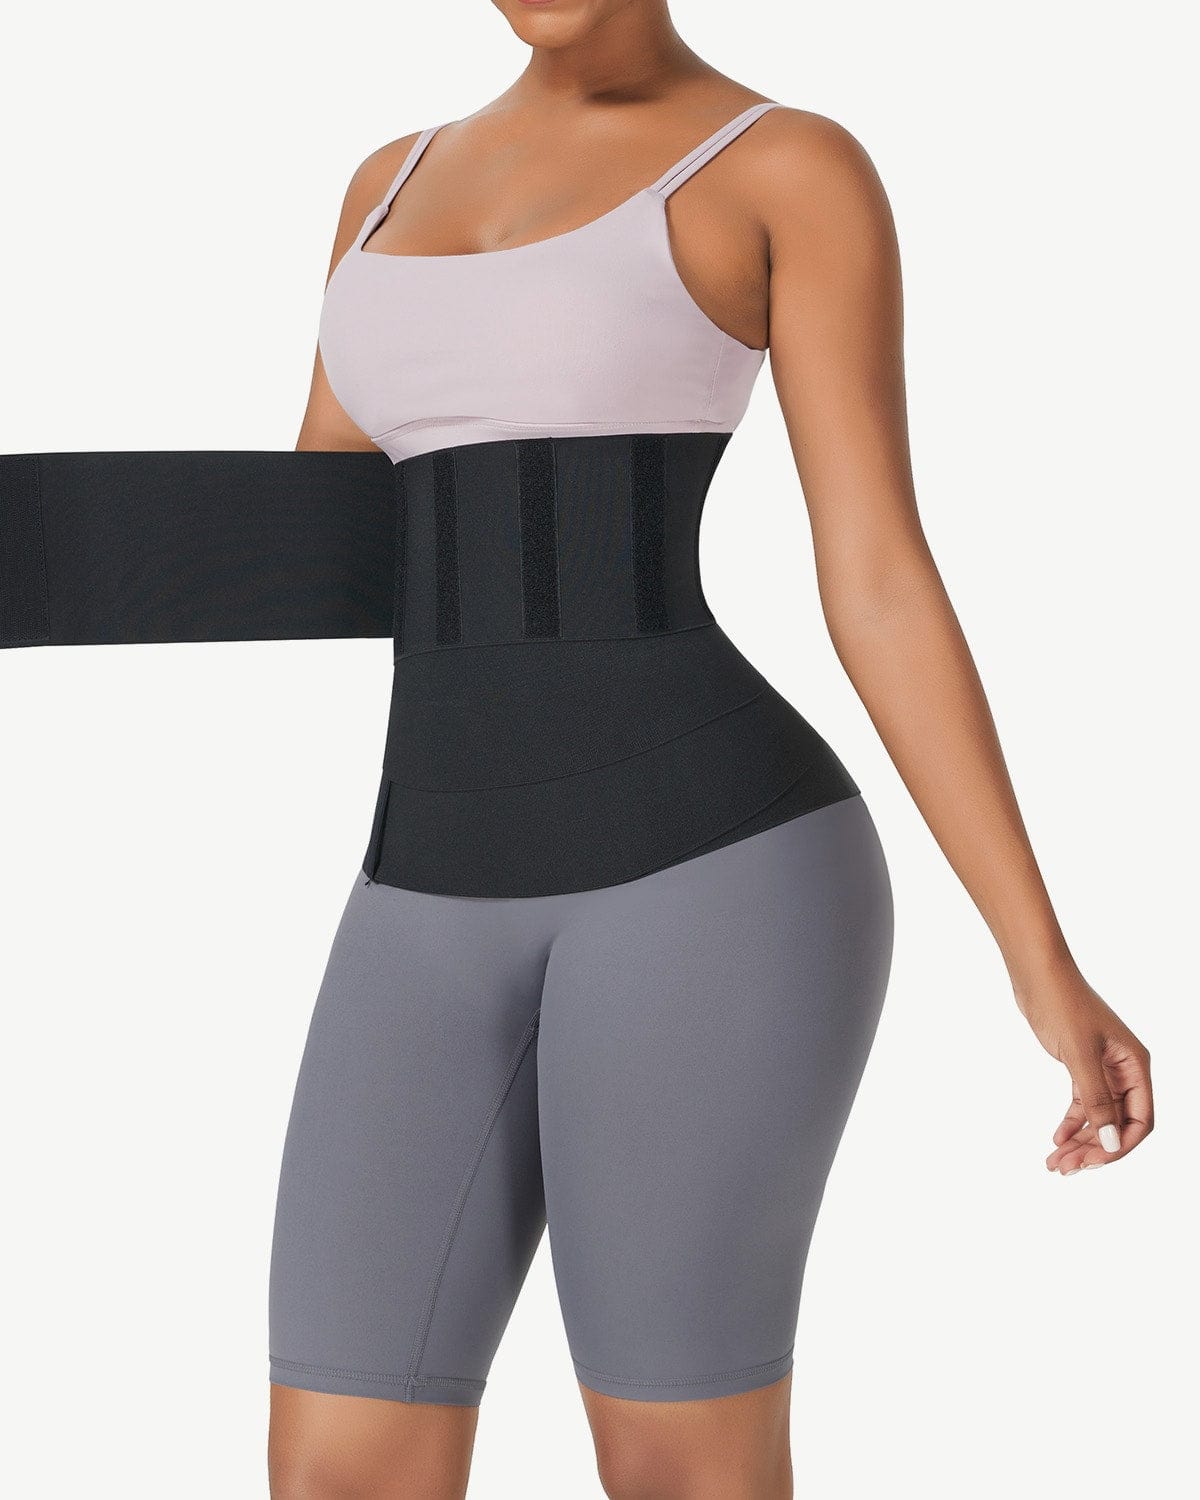 Womens Lumbar Sheath Lower Belly Shapewear For Weight Loss, Tummy Control,  And Abdominal Support From Elroyelissa, $10.32